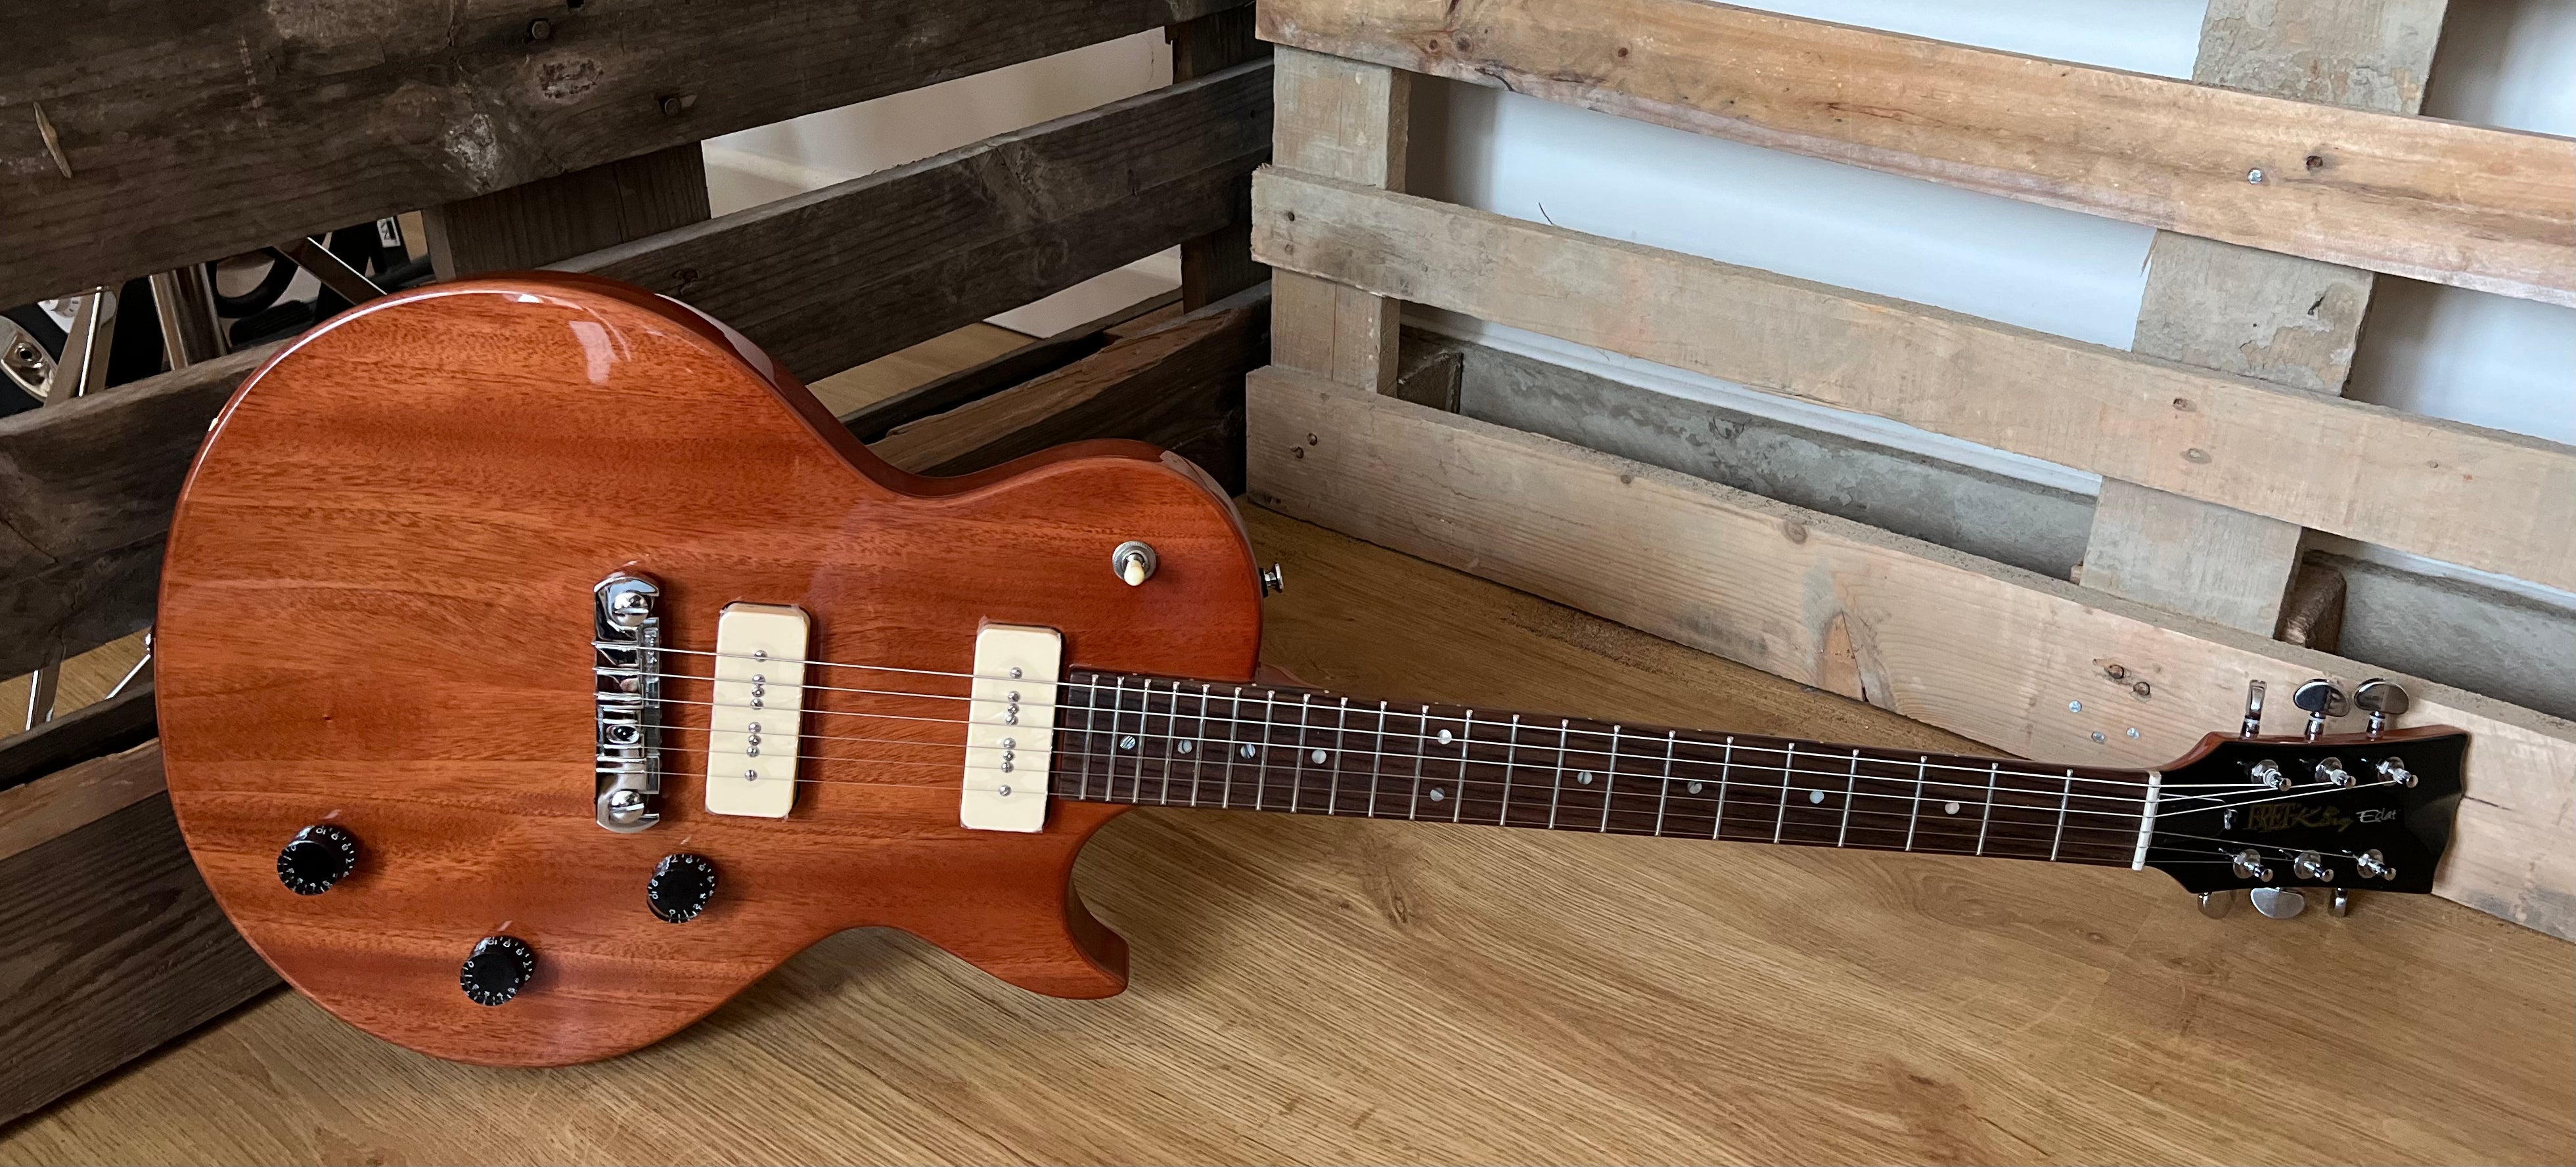 FRET KING ECLAT STANDARD GUITAR - NATURAL MAHOGANY  (Includes Our £85 Pro Setup Free), Electric Guitar for sale at Richards Guitars.